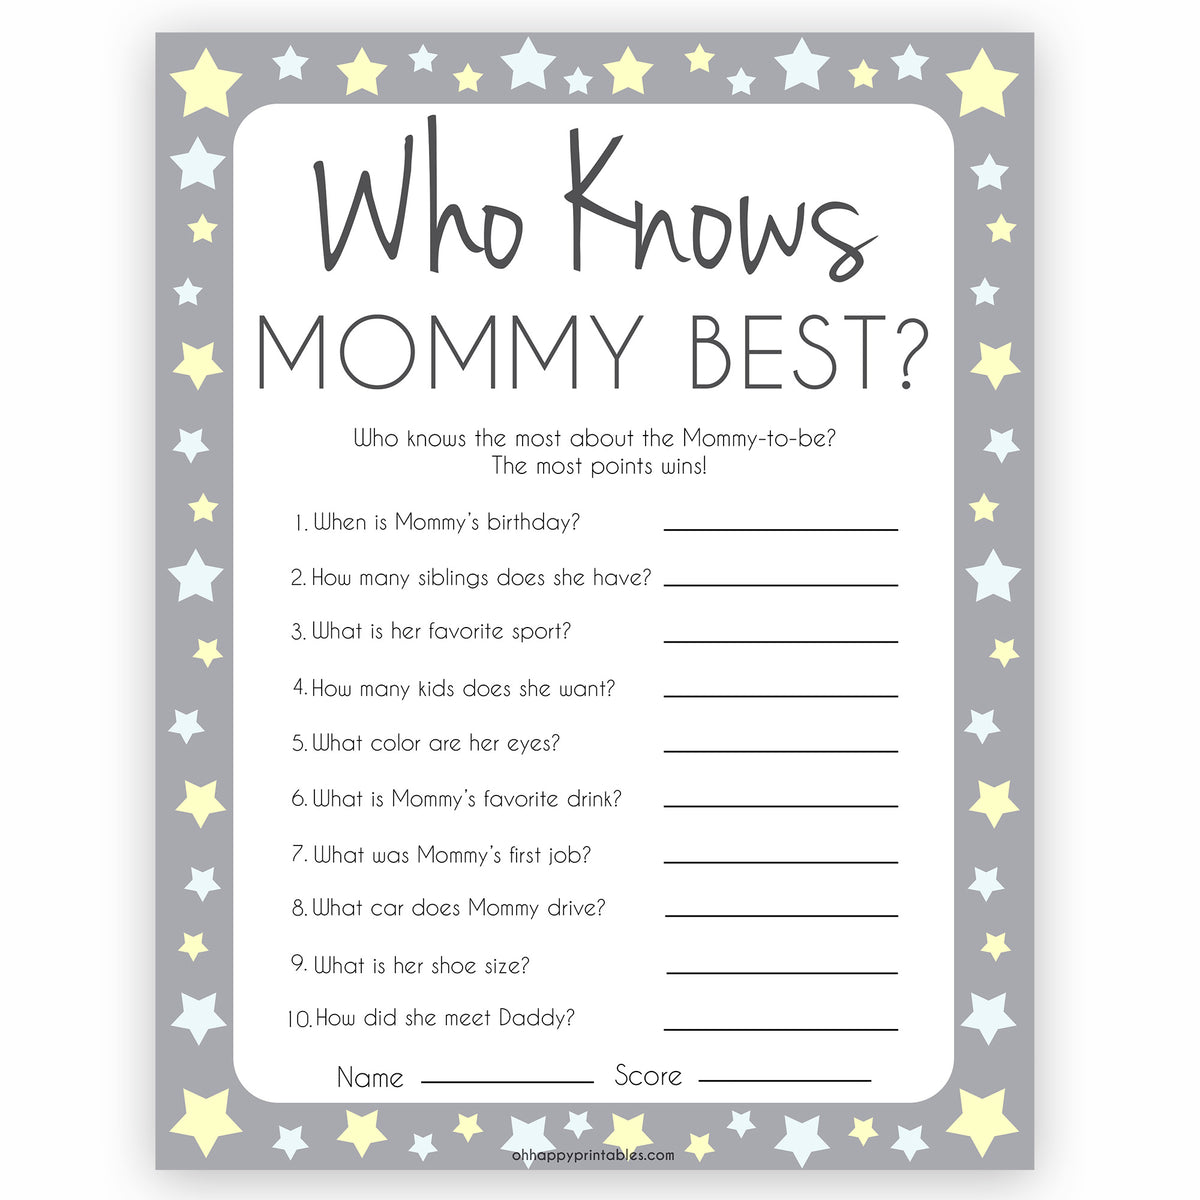 who-knows-mommy-best-game-grey-yellow-printable-baby-shower-games